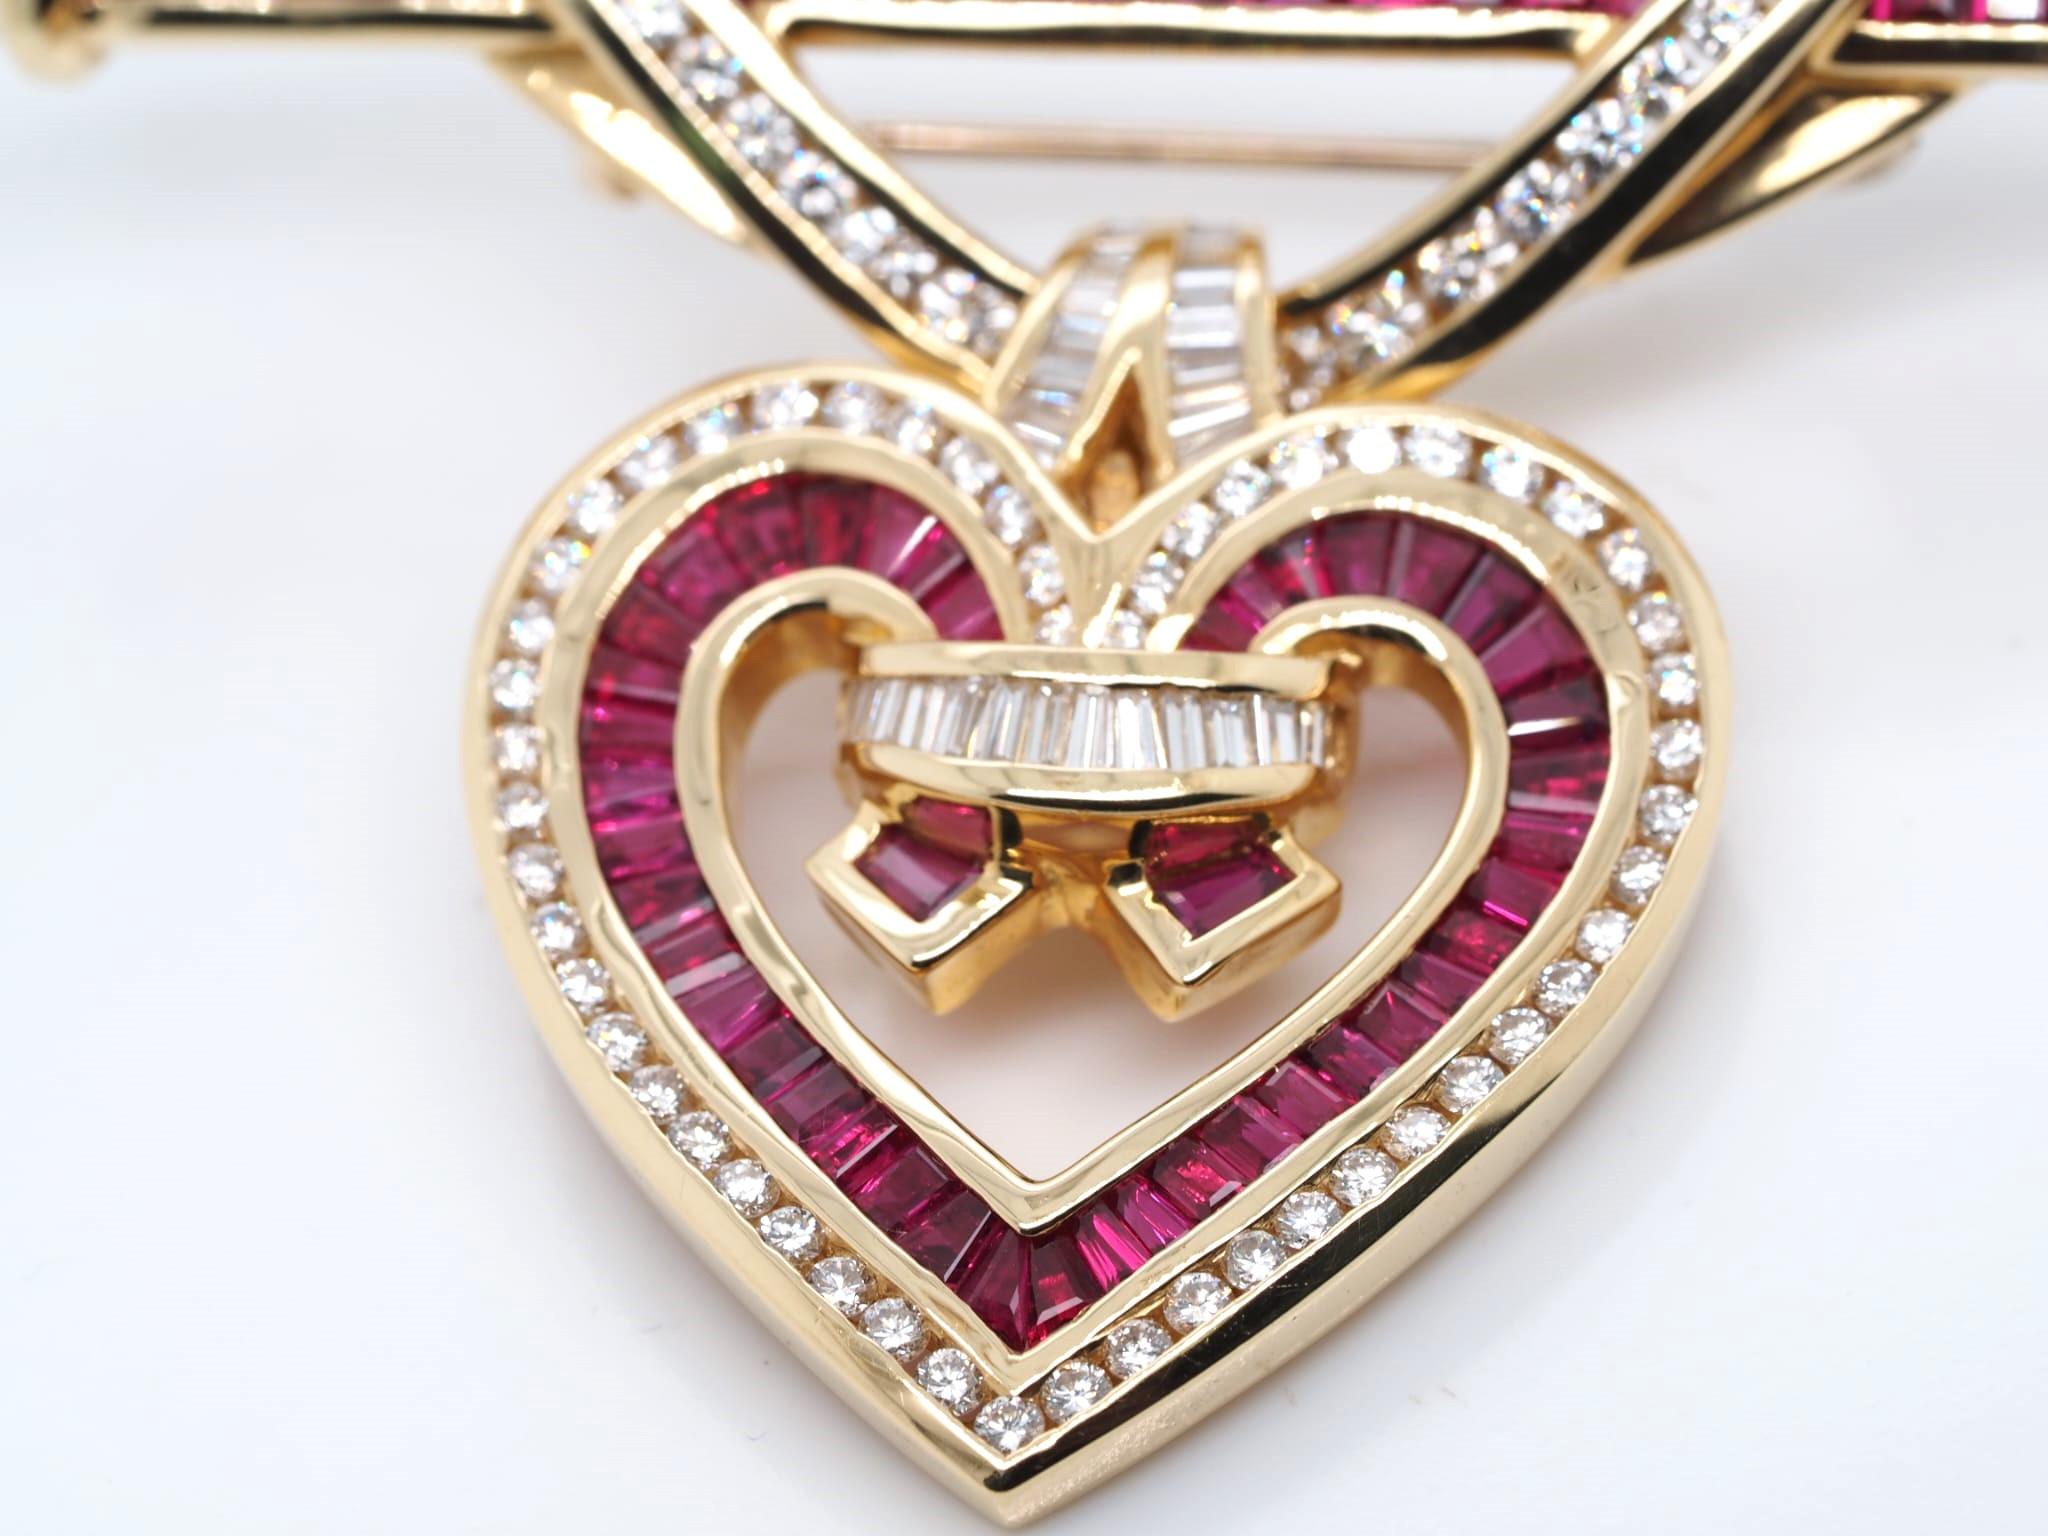 Charles Krypell 18KT Gold 3.2 Ct Ruby 2.67 Ct Diamond Pendant Brooch Pin In Excellent Condition For Sale In Addison, TX